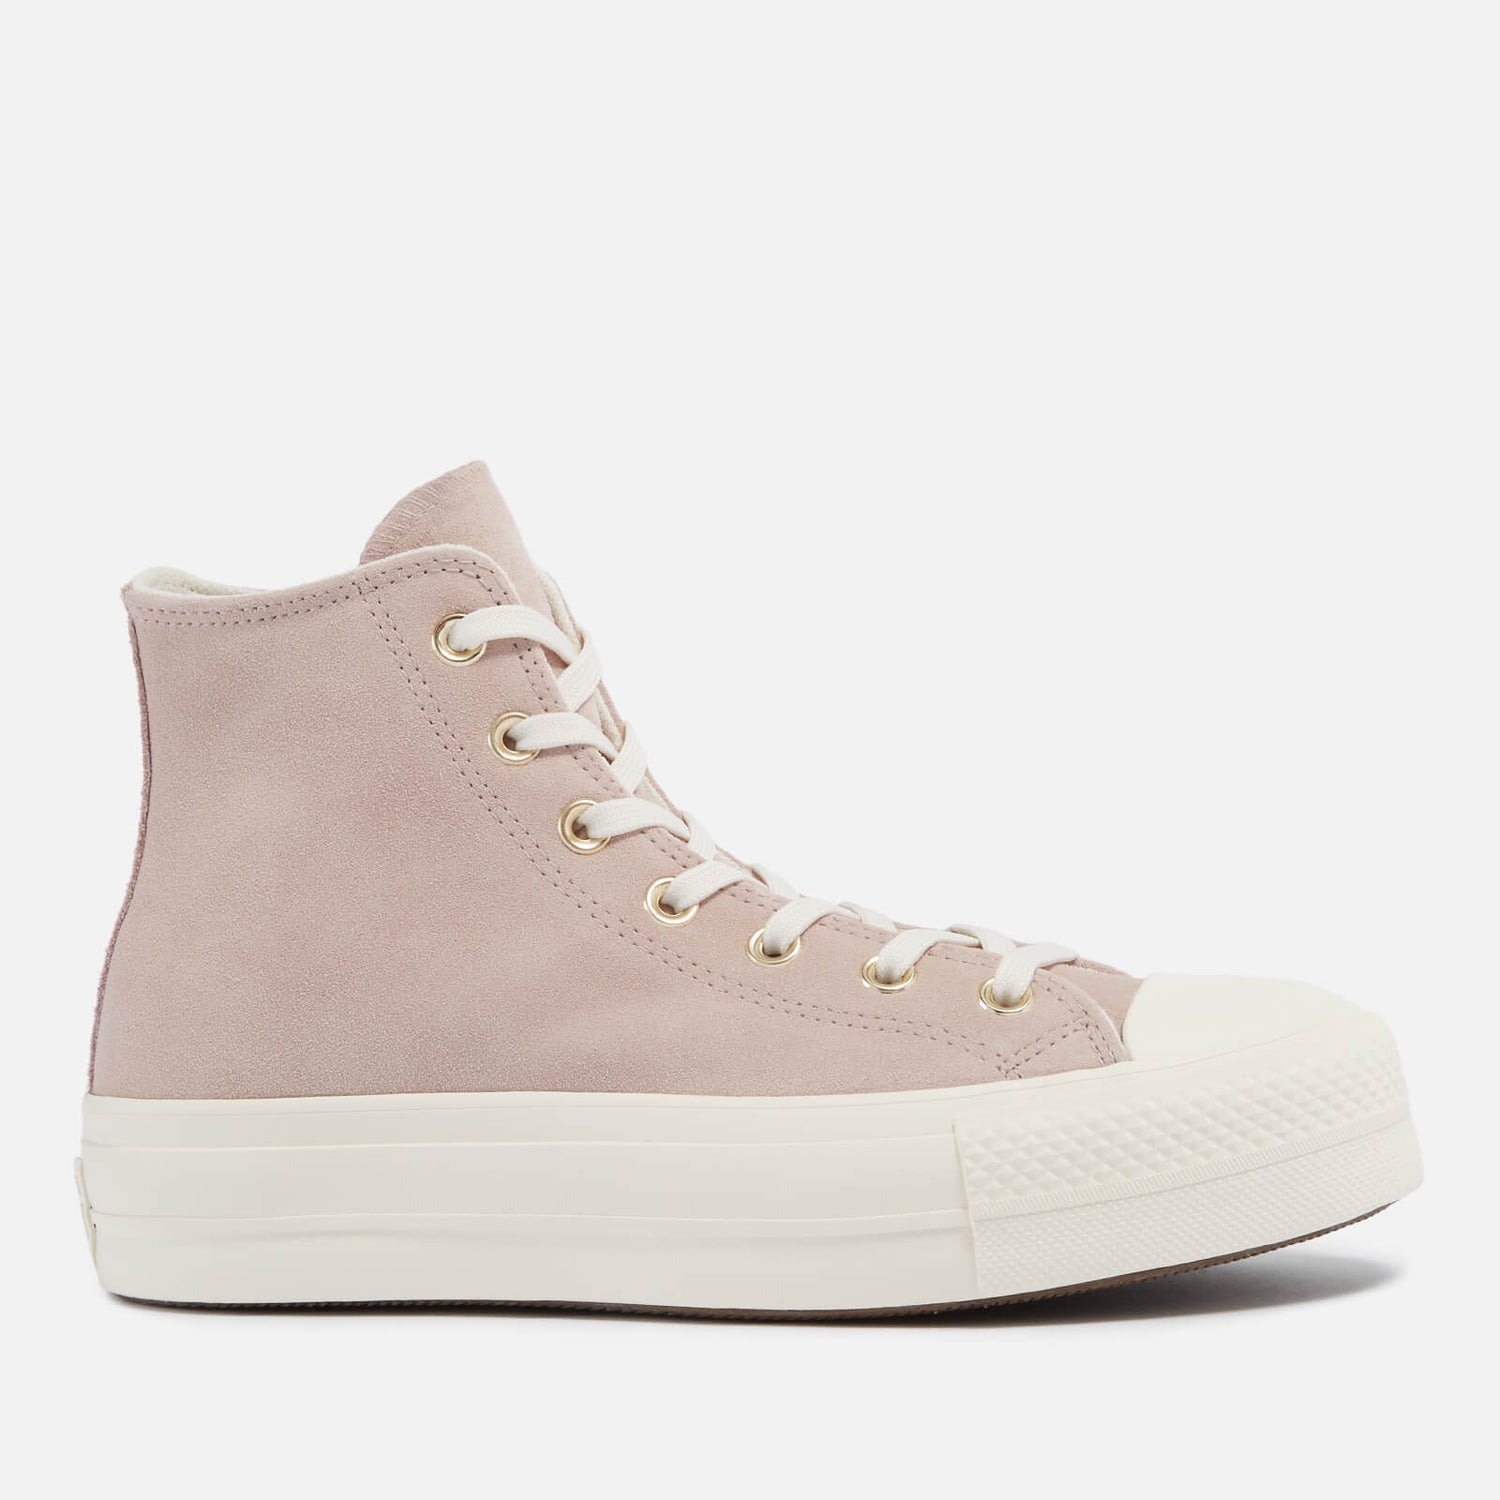 Converse Chuck Taylor All Star Lift Suede Hi-Top Trainers - UK 3